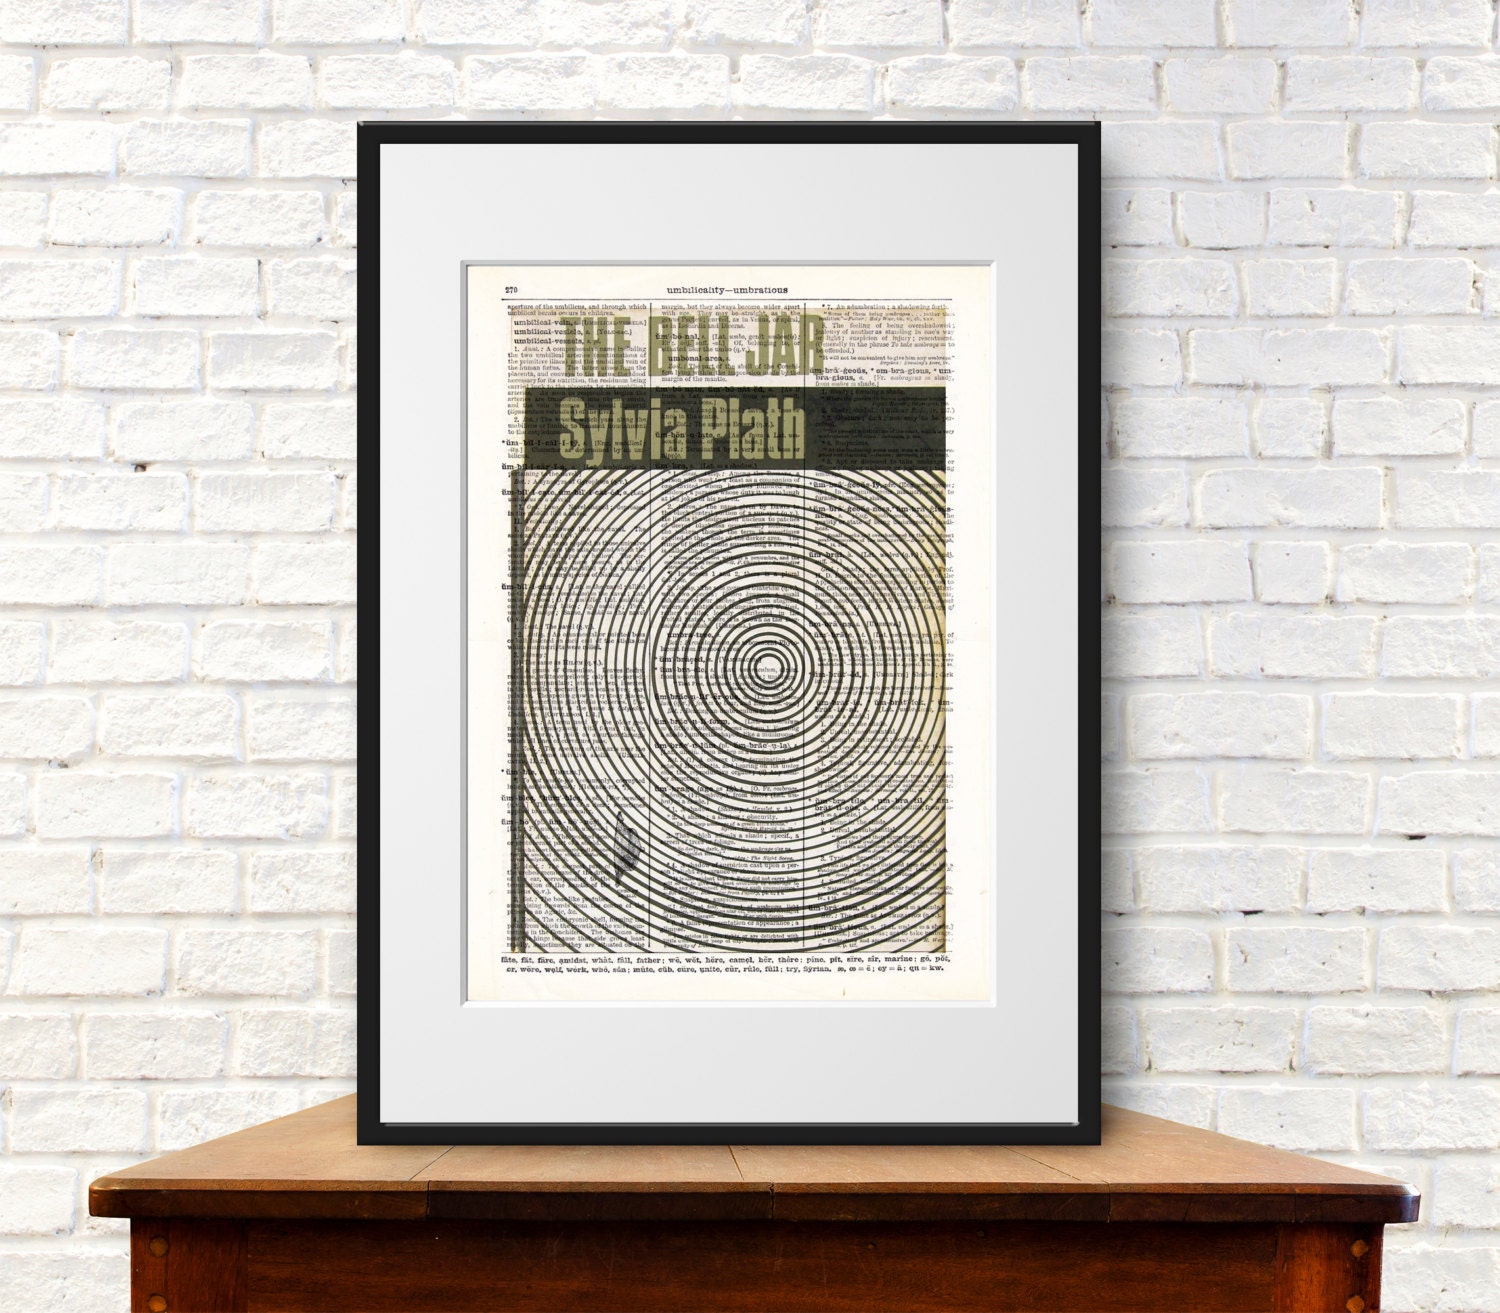 The Bell Jar by Sylvia Plath Print on an Antique Page, Book Cover Art,  Bookish Gifts 